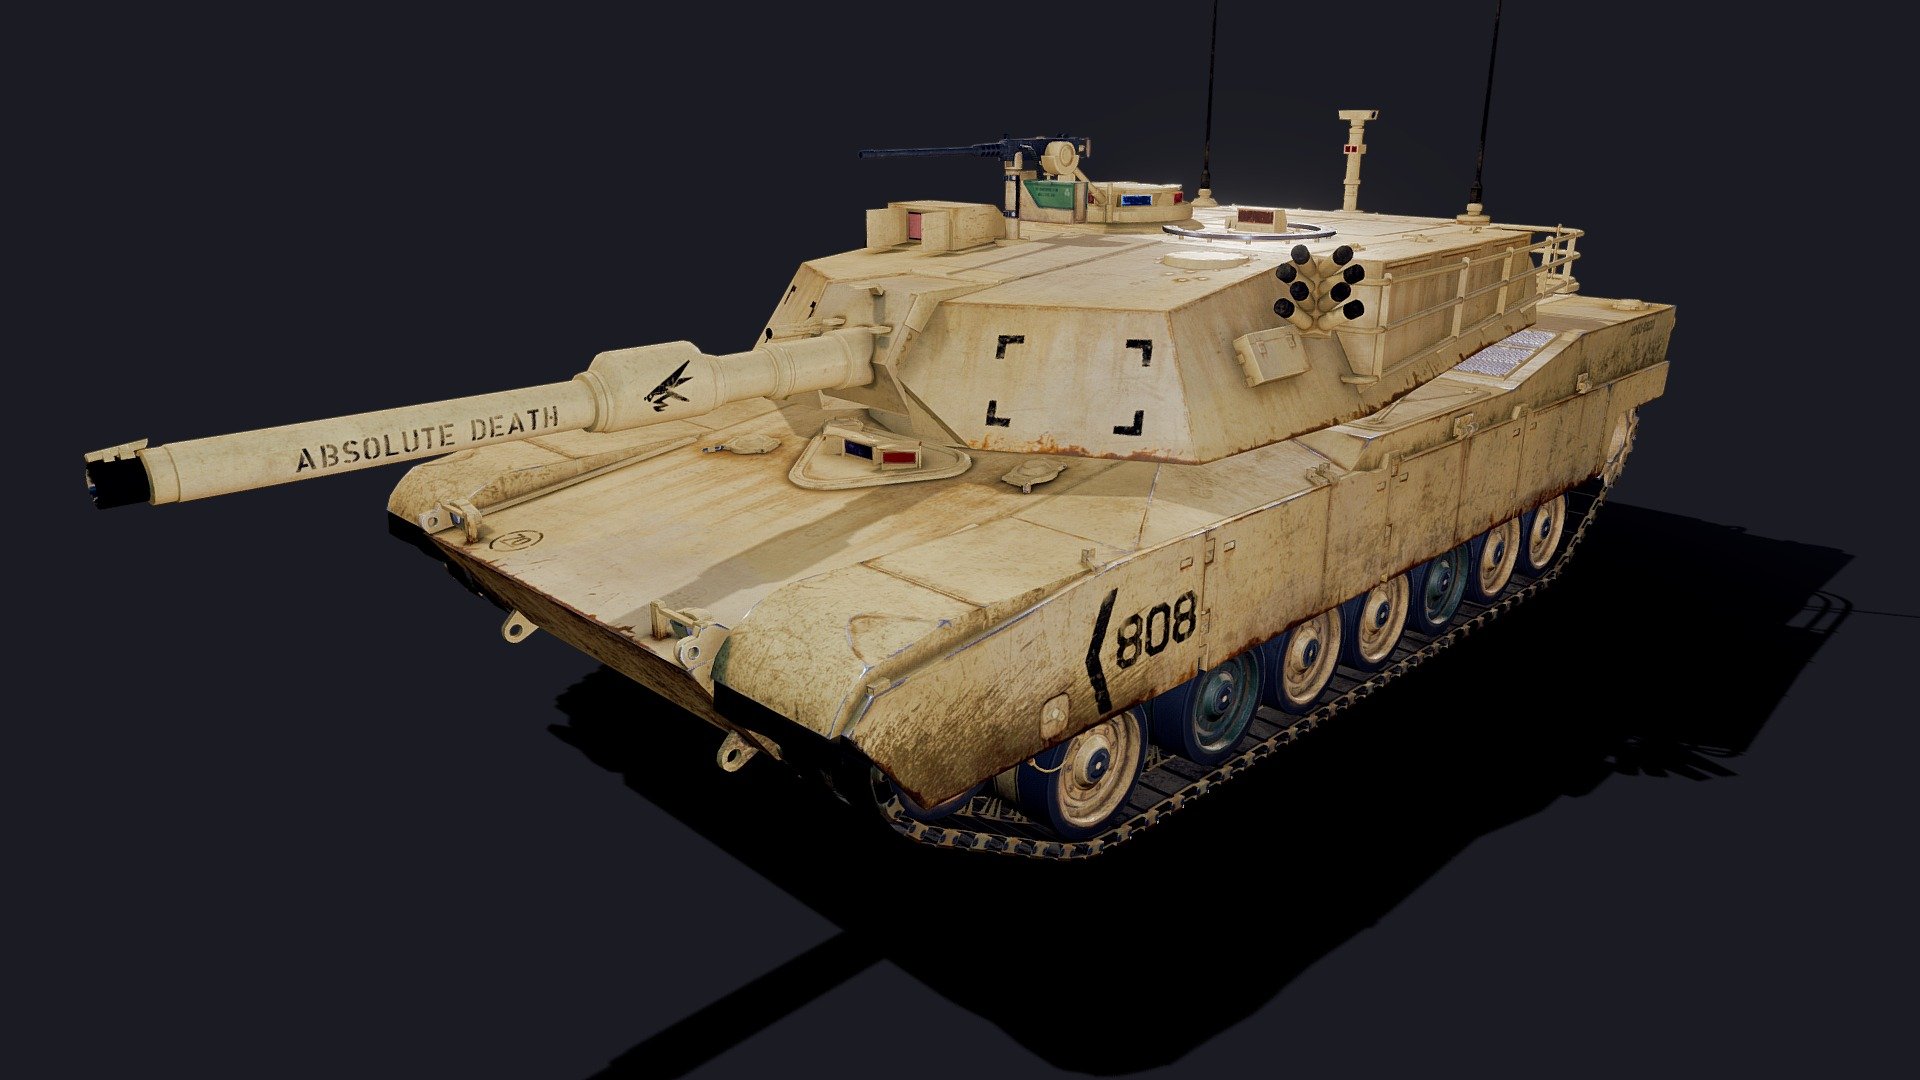 Real-world scale and centered

UnwrapUVW included

Ready to be animated

Maps sizes: 

4096x4096 (body and turret),
2048x2048 (wheels, machine gun and other stuff),
1024x1024 (tracks)




Provided Maps: 

Albedo,
Normal,
Glossynes,
Metalness,
AO,
Cavity,
Opacity,
  The M1 Abrams is a third-generation American main battle tank designed by Chrysler Defense (now General Dynamics Land Systems). Conceived for modern armored ground warfare and now one of the heaviest tanks in service at nearly 68 short tons (almost 62 metric tons), it introduced several innovative features, including a multifuel turbine engine, sophisticated Chobham composite armor, a computer fire control system, separate ammunition storage in a blow-out compartment, and NBC protection for crew safety. Initial models of the M1 were armed with a licensed-produced 105 mm Royal Ordnance L7 gun, while later variants feature a licensed Rheinmetall 120 mm L/44.



 - M1 Abrams - Buy Royalty Free 3D model by Alexandru  Chirileac (@sasa454) 3d model